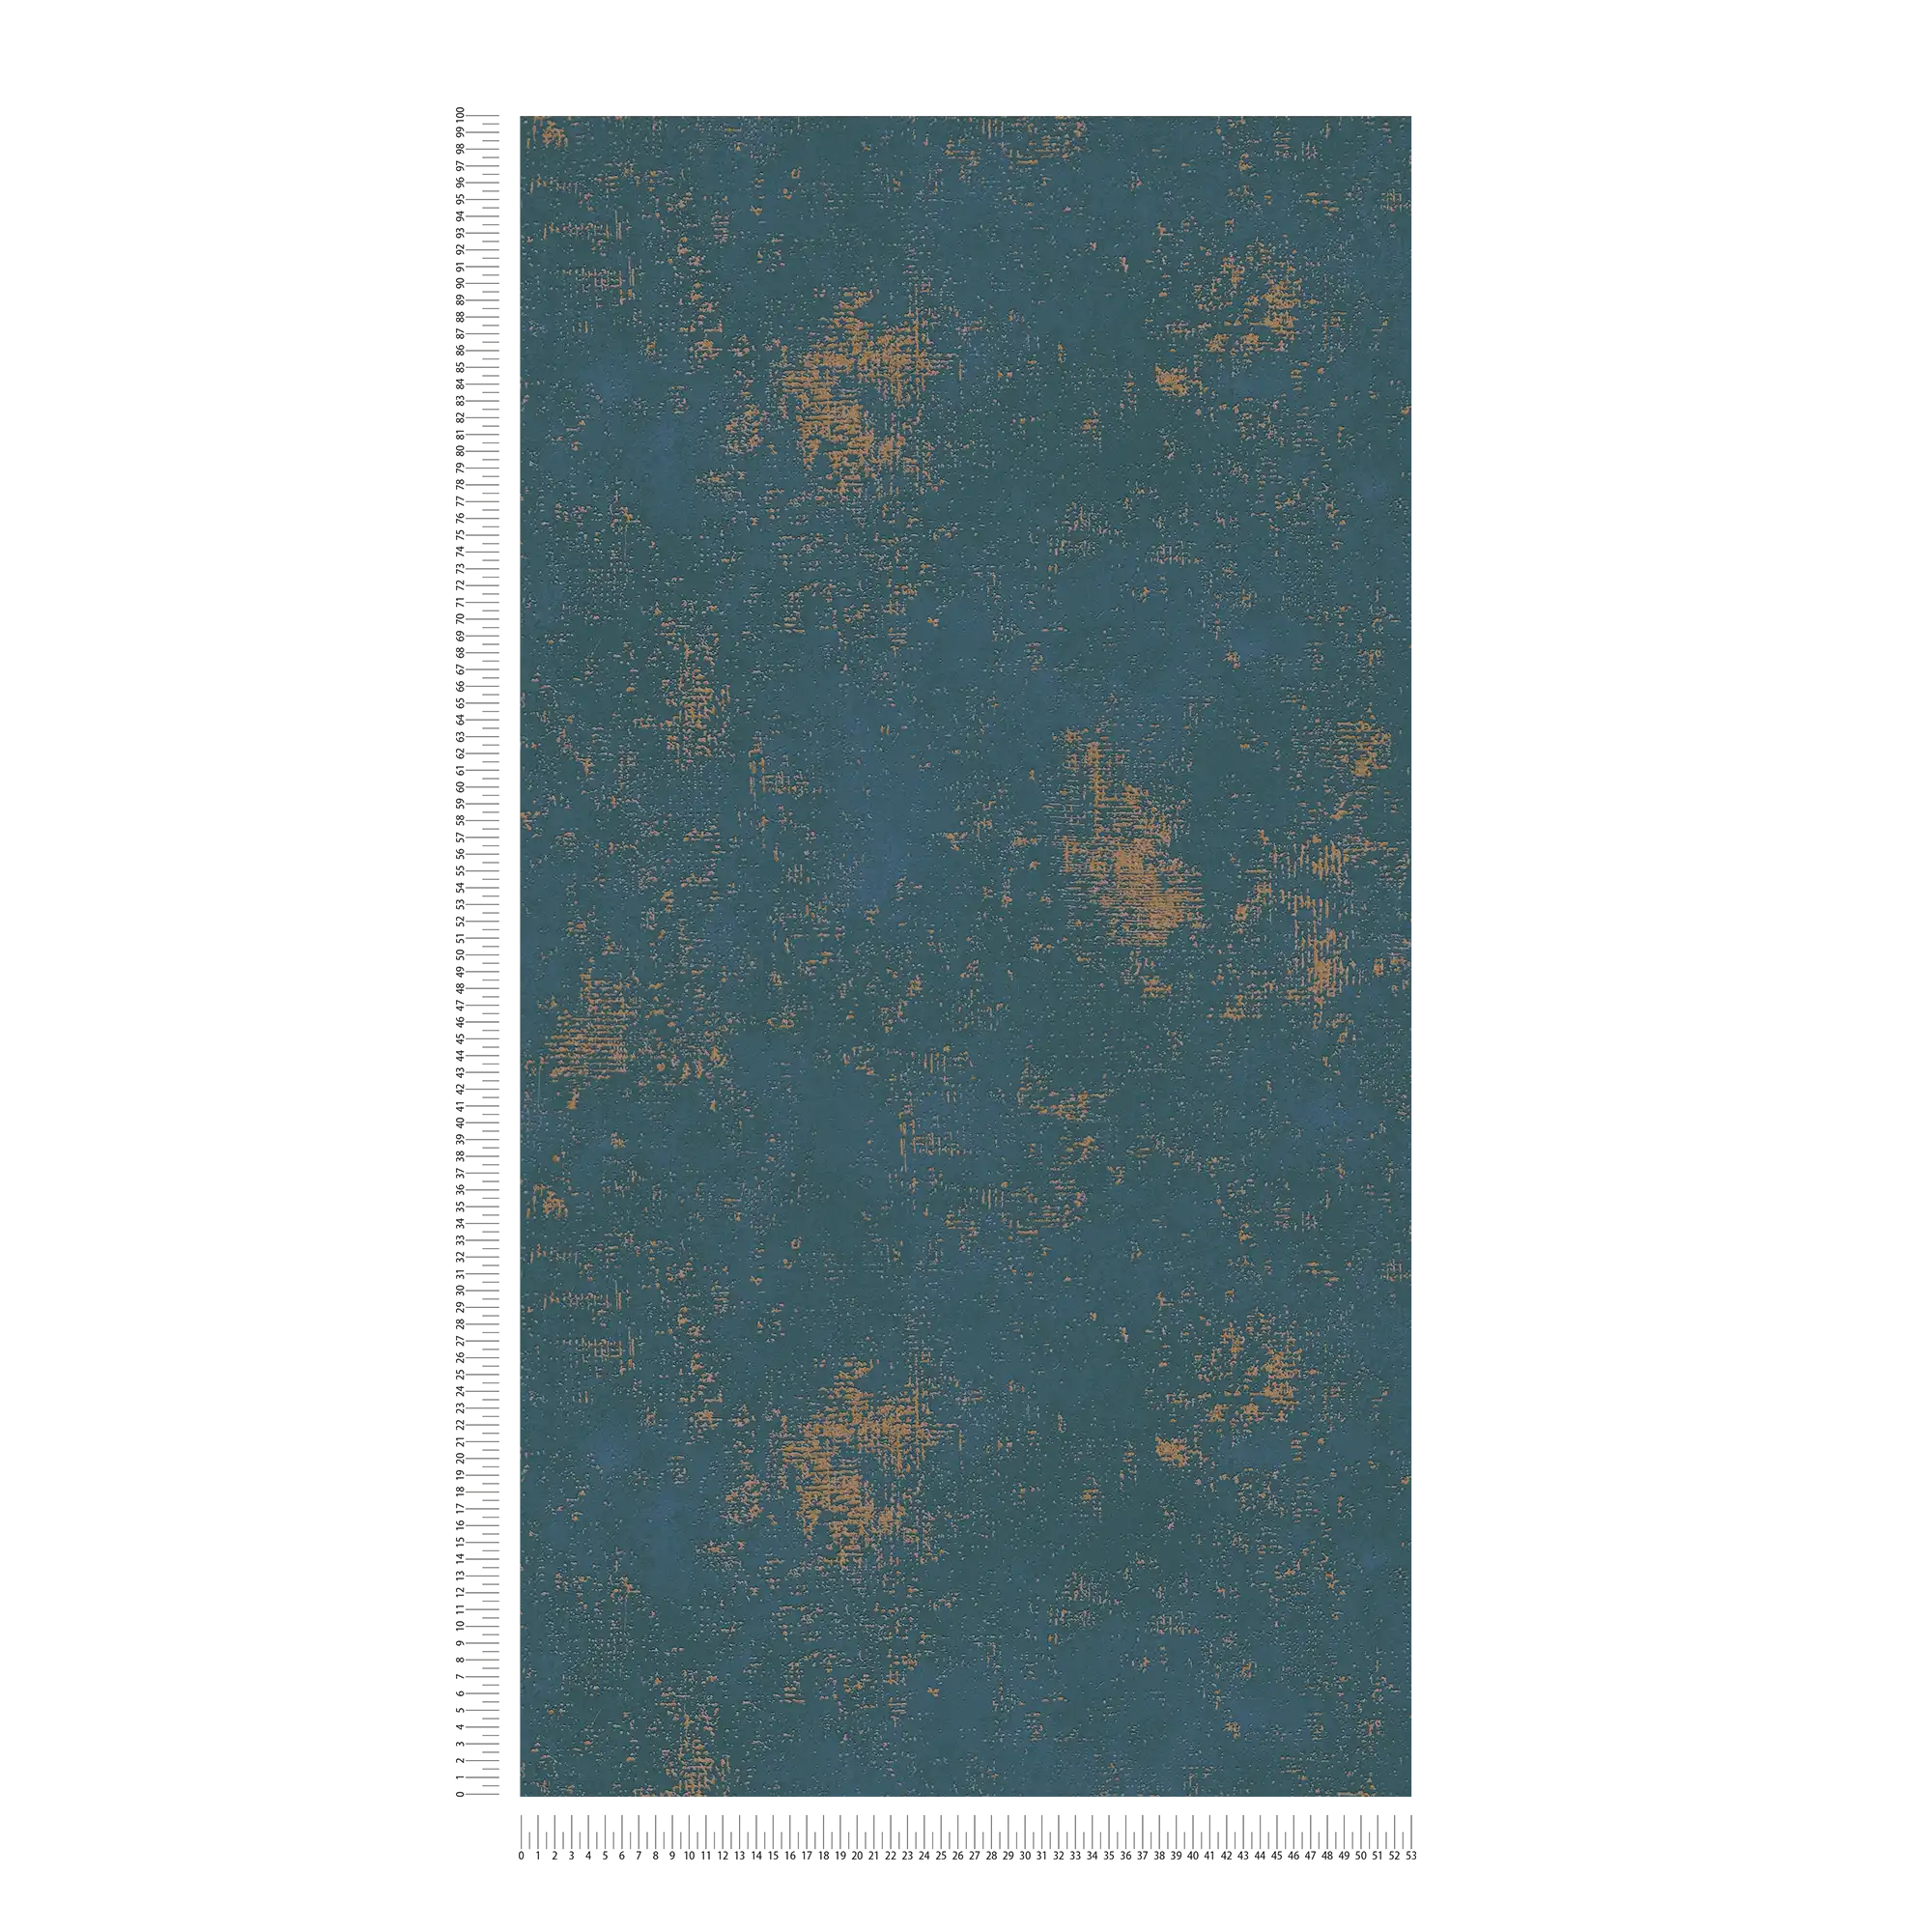             Blue wallpaper with gold metallic accent and texture details
        